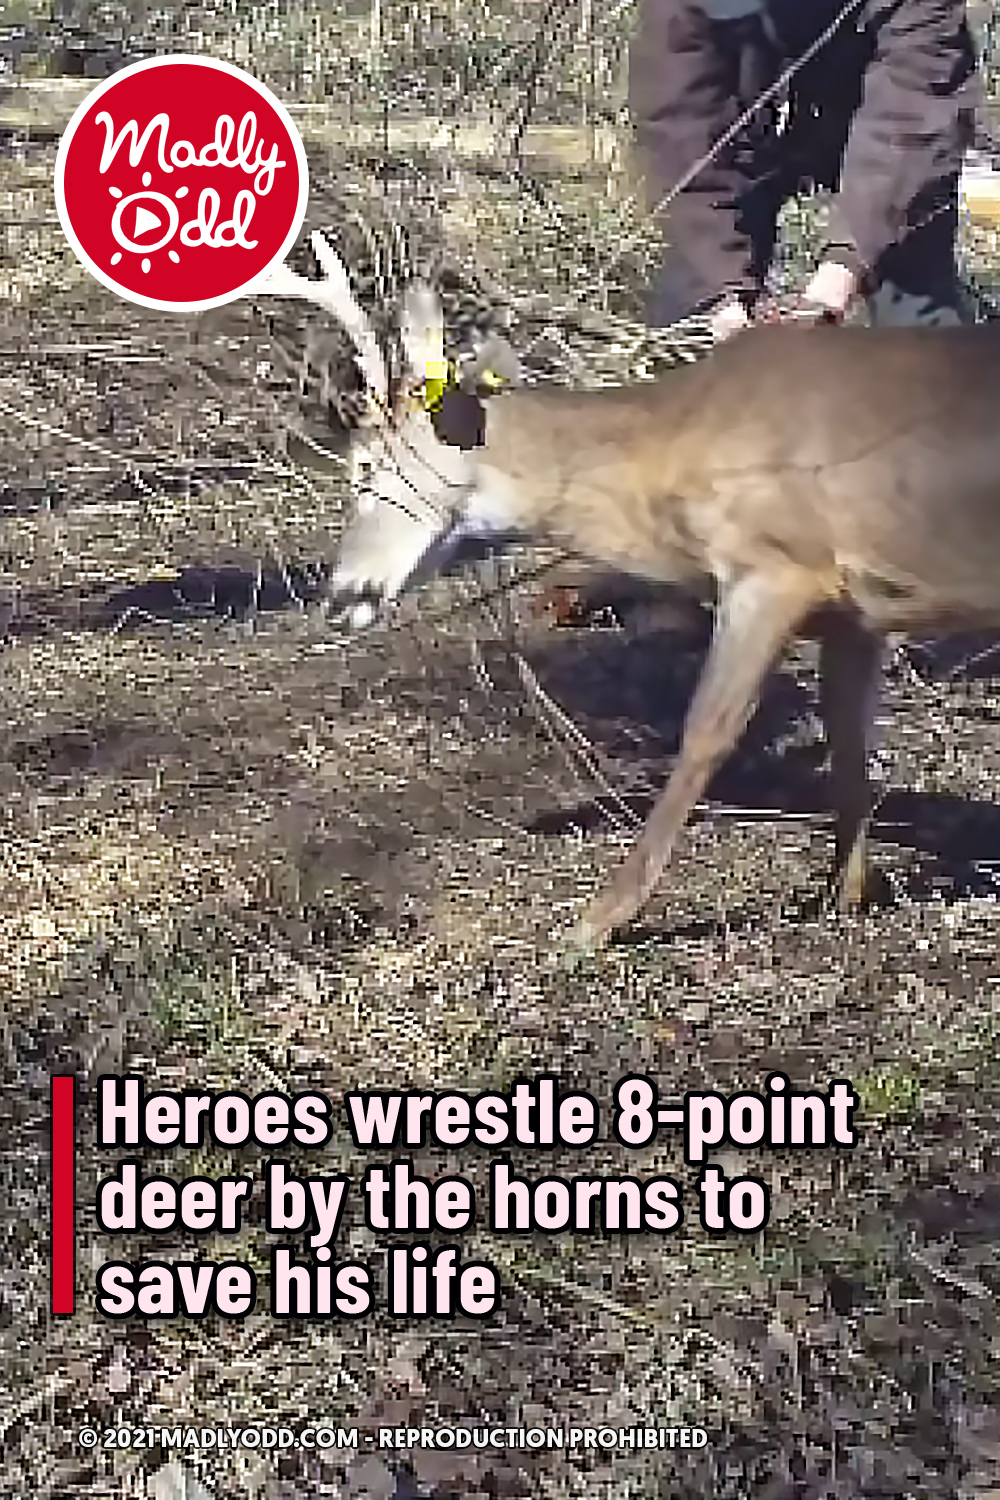 Heroes wrestle 8-point deer by the horns to save his life